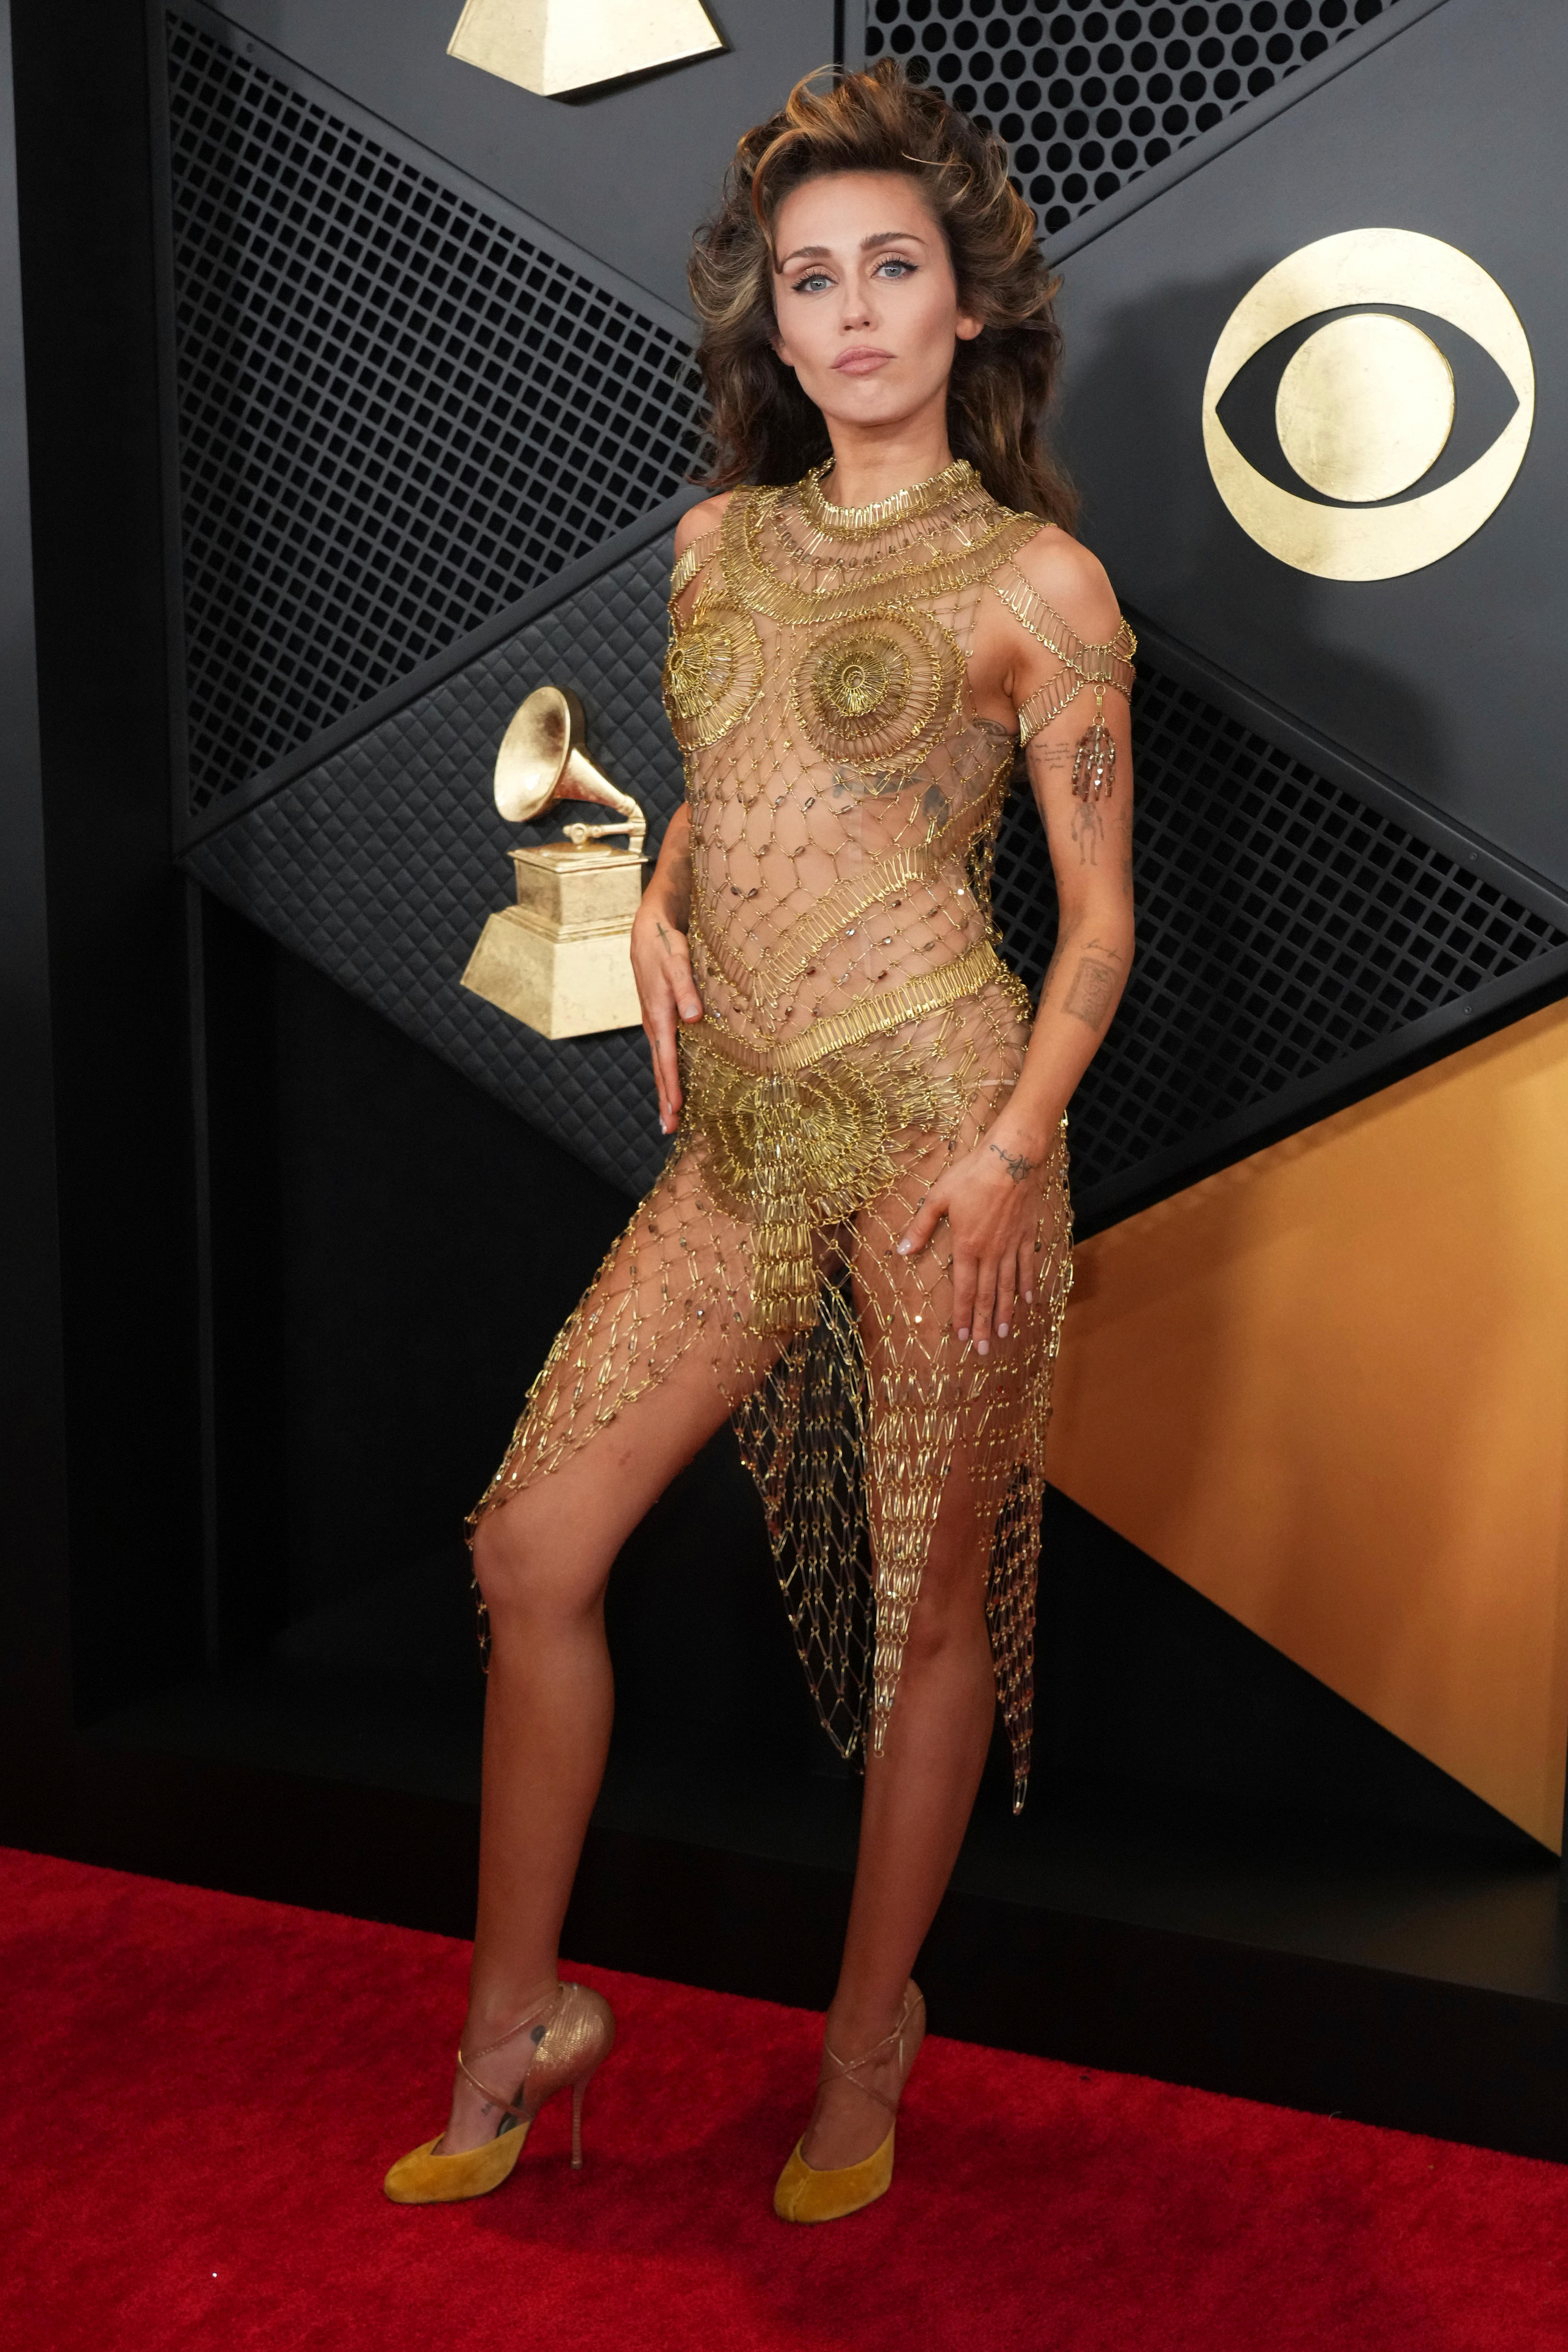 Miley Cyrus wearing a gold woven bodysuit